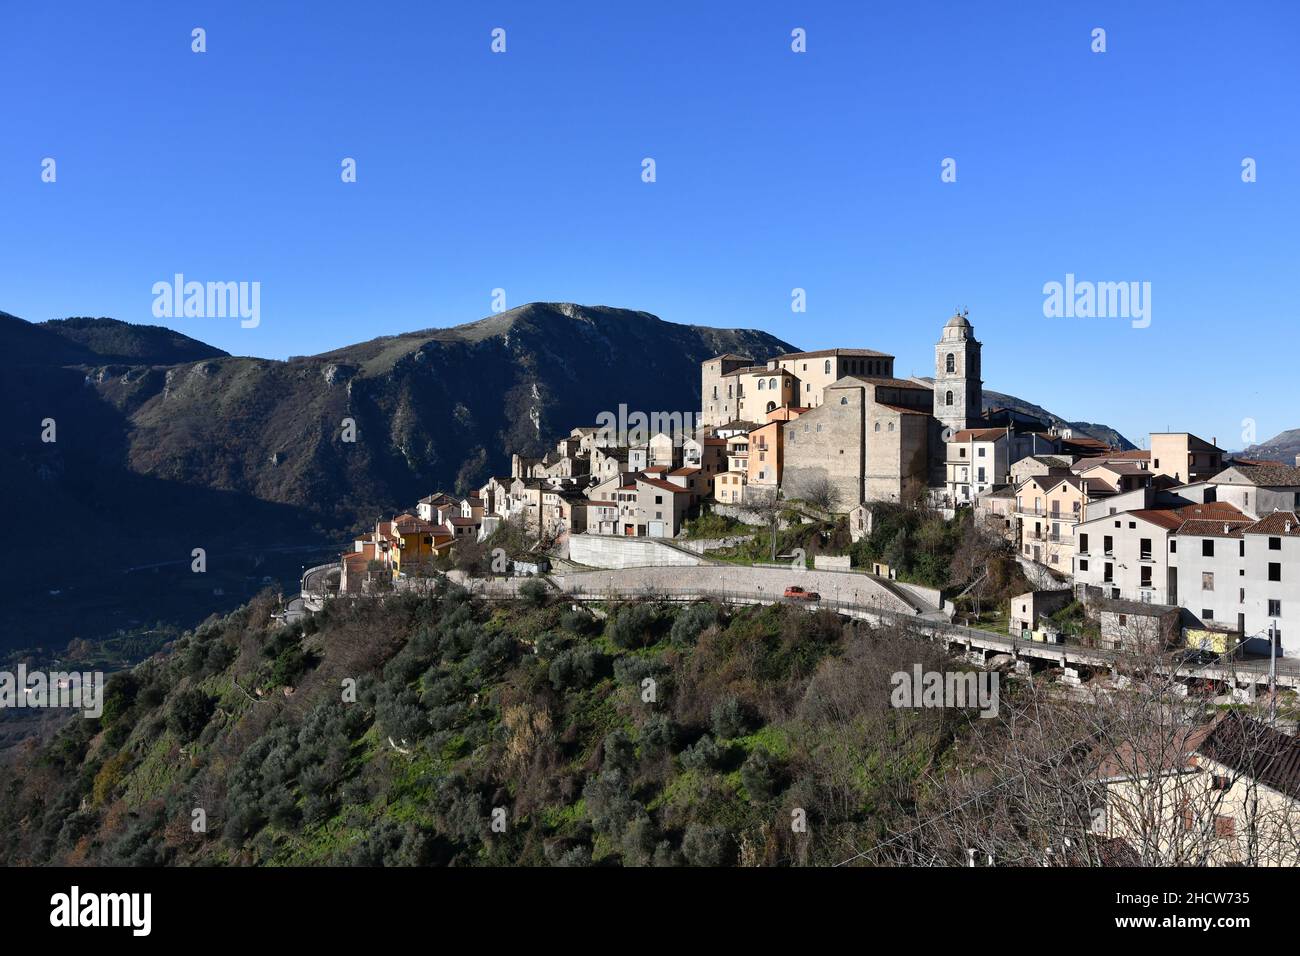 Panoramic view of Savoia di Lucania, a small town in the mountains of the province of Potenza. Stock Photo